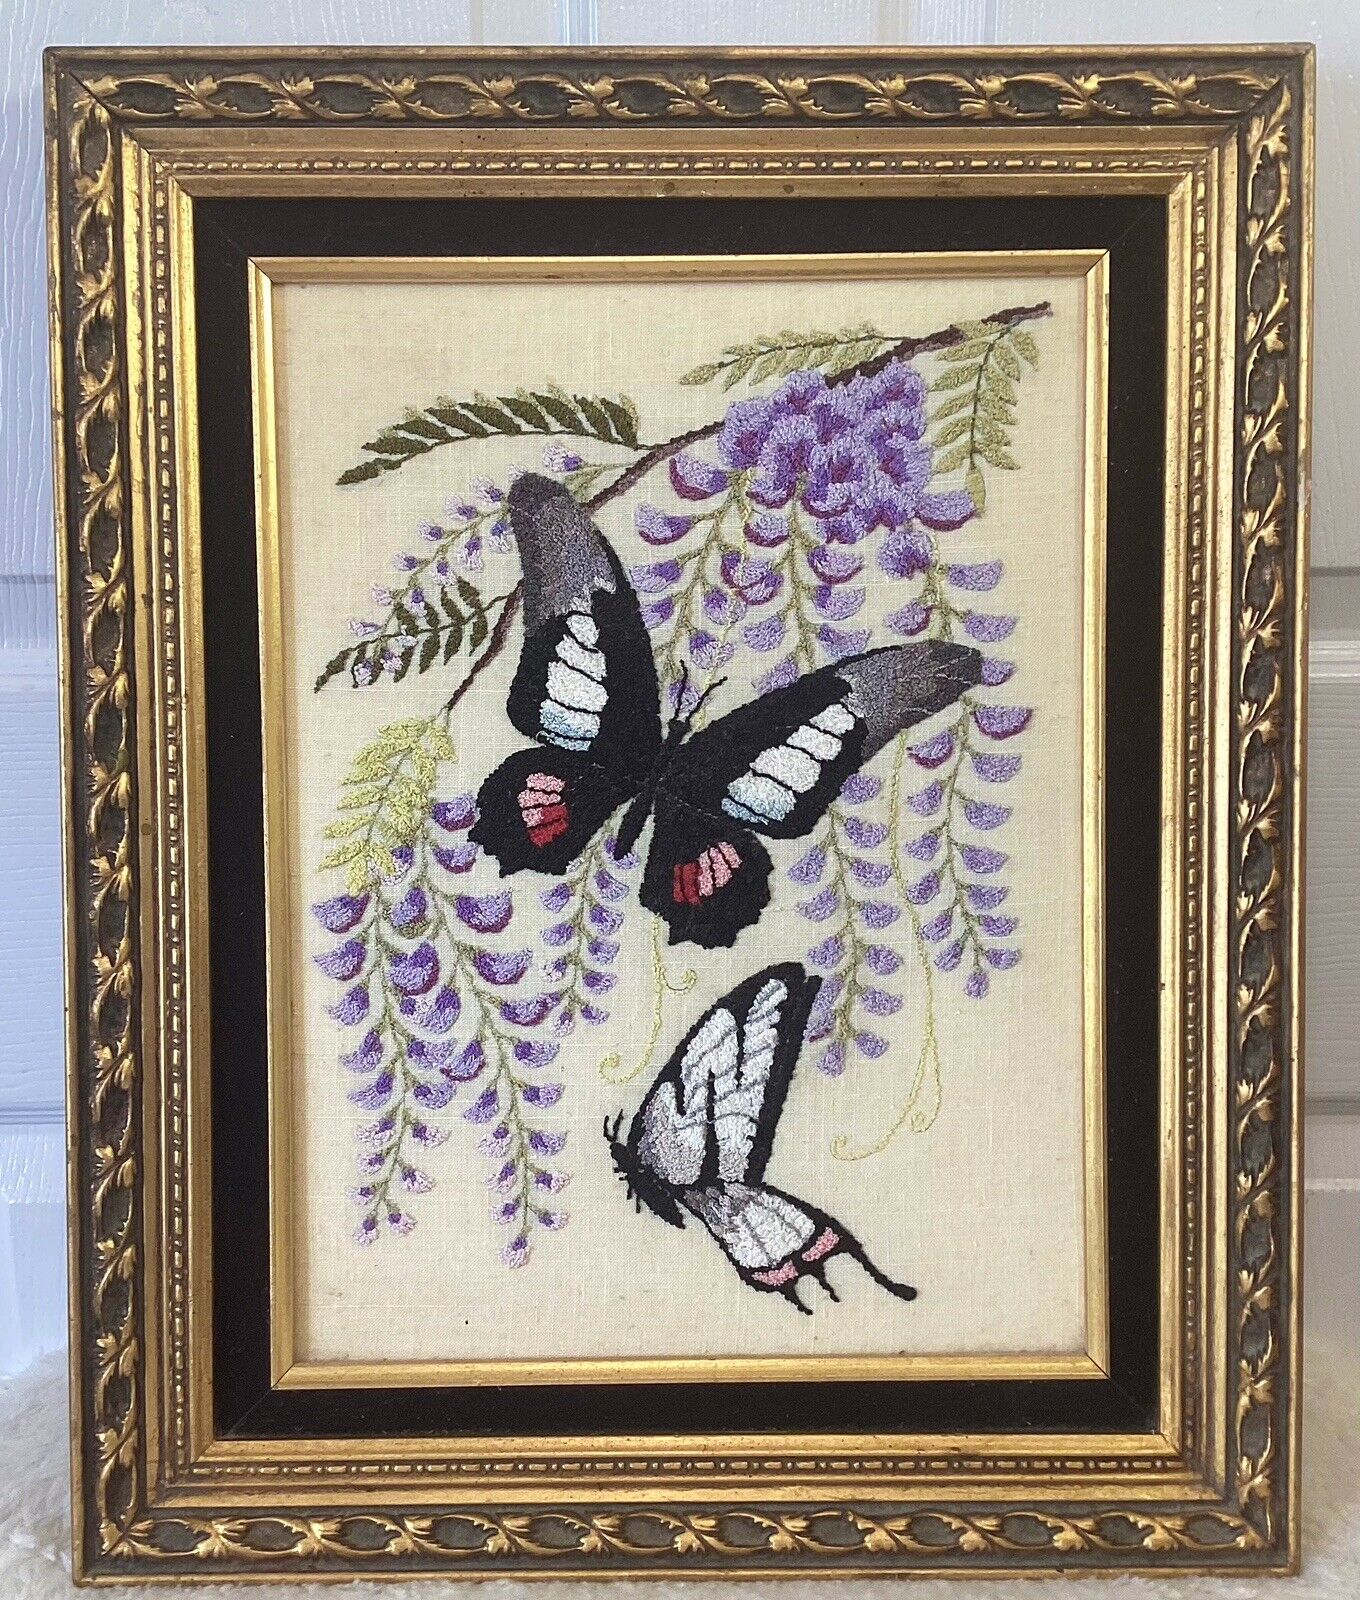 Vintage Crewel Embroidered Butterfly Wisteria Ornate Frame Picture Finished 21”